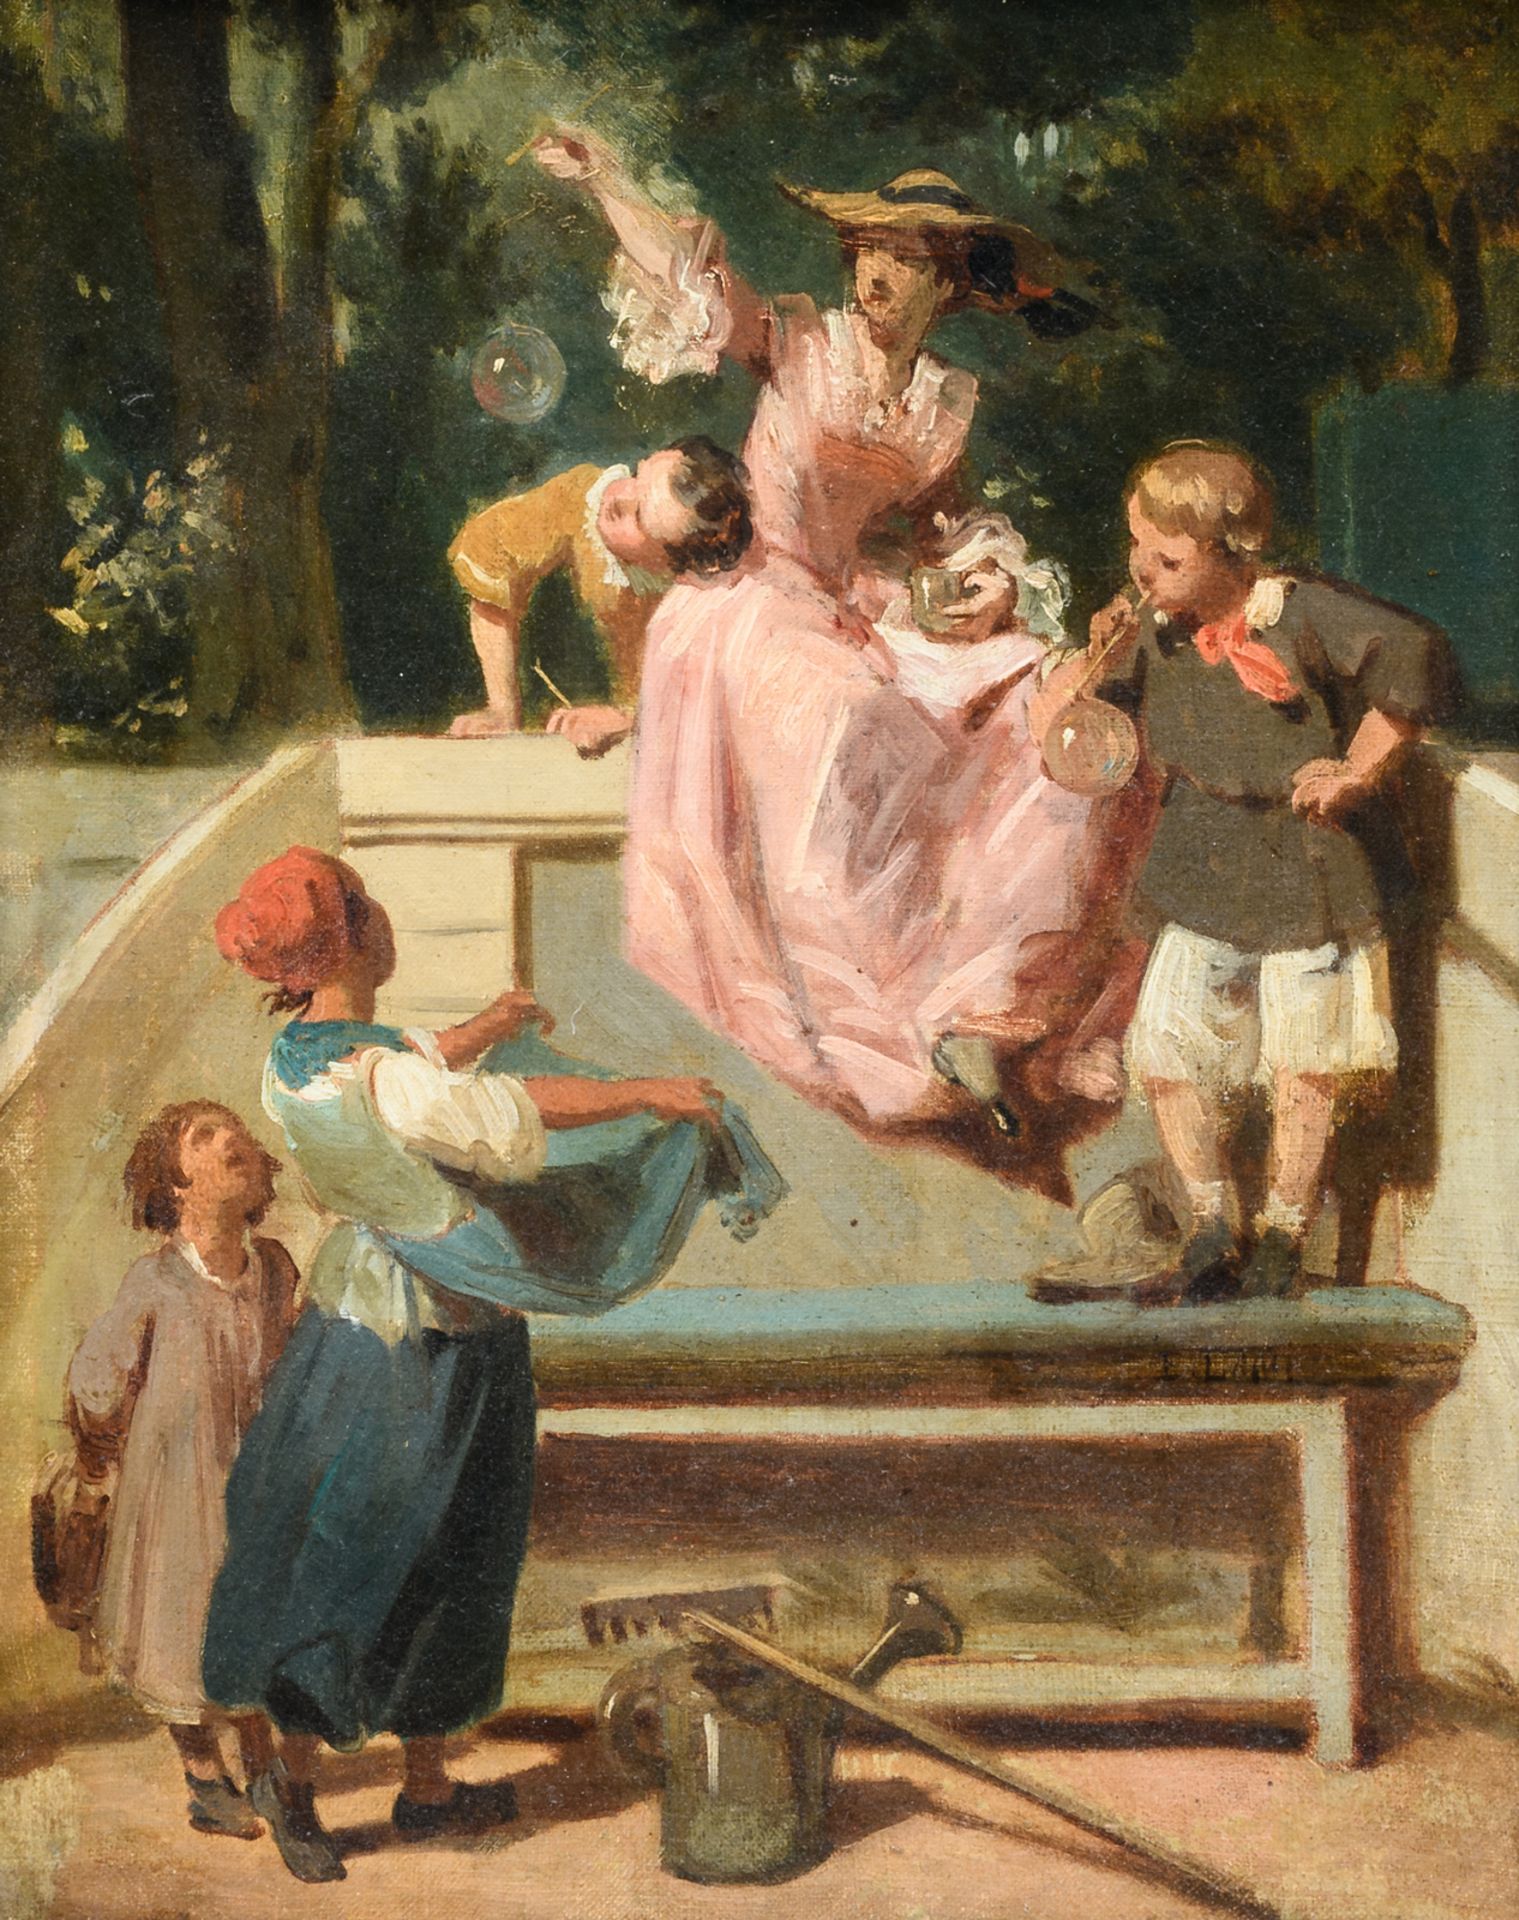 (Lami E.), blowing bubbles, oil on canvas, late 19th - early 20thC, 32 x 41 cm